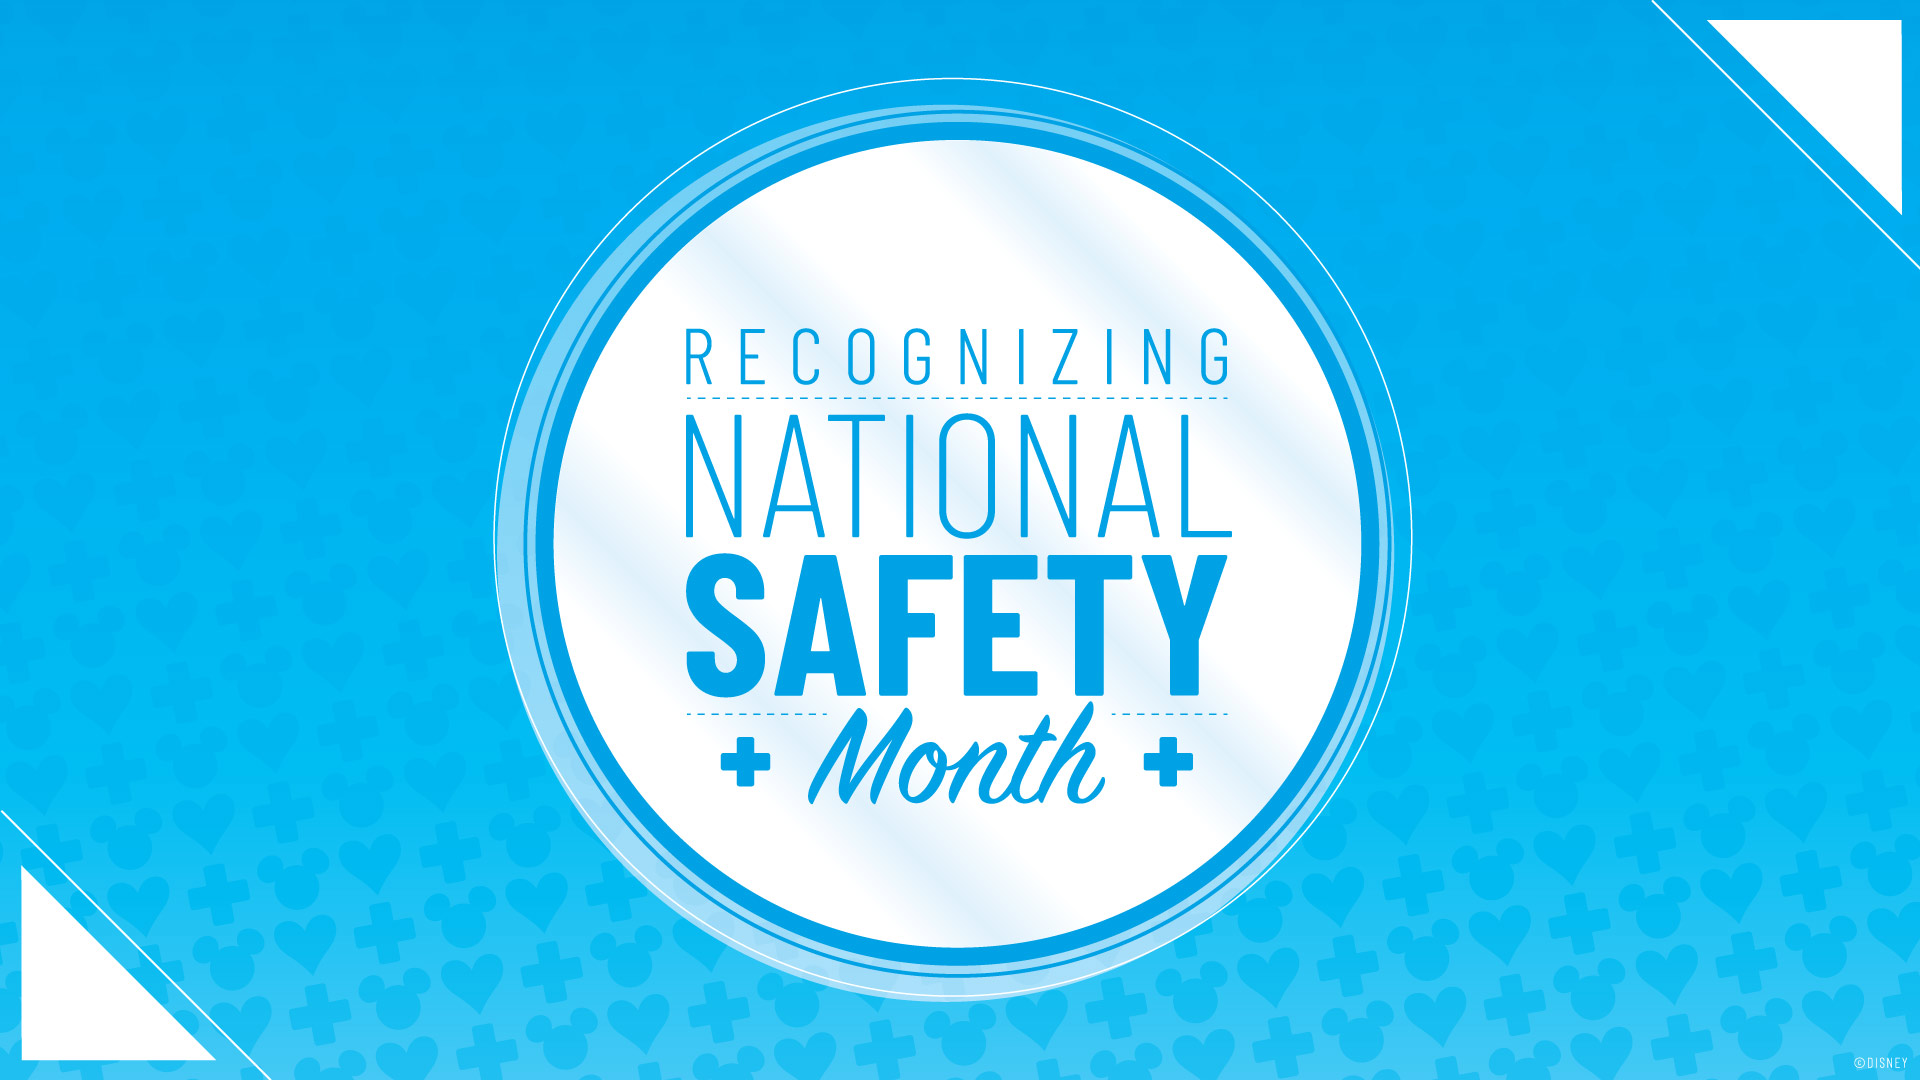 Recognizing National Safety Month at Disney Parks Around the World